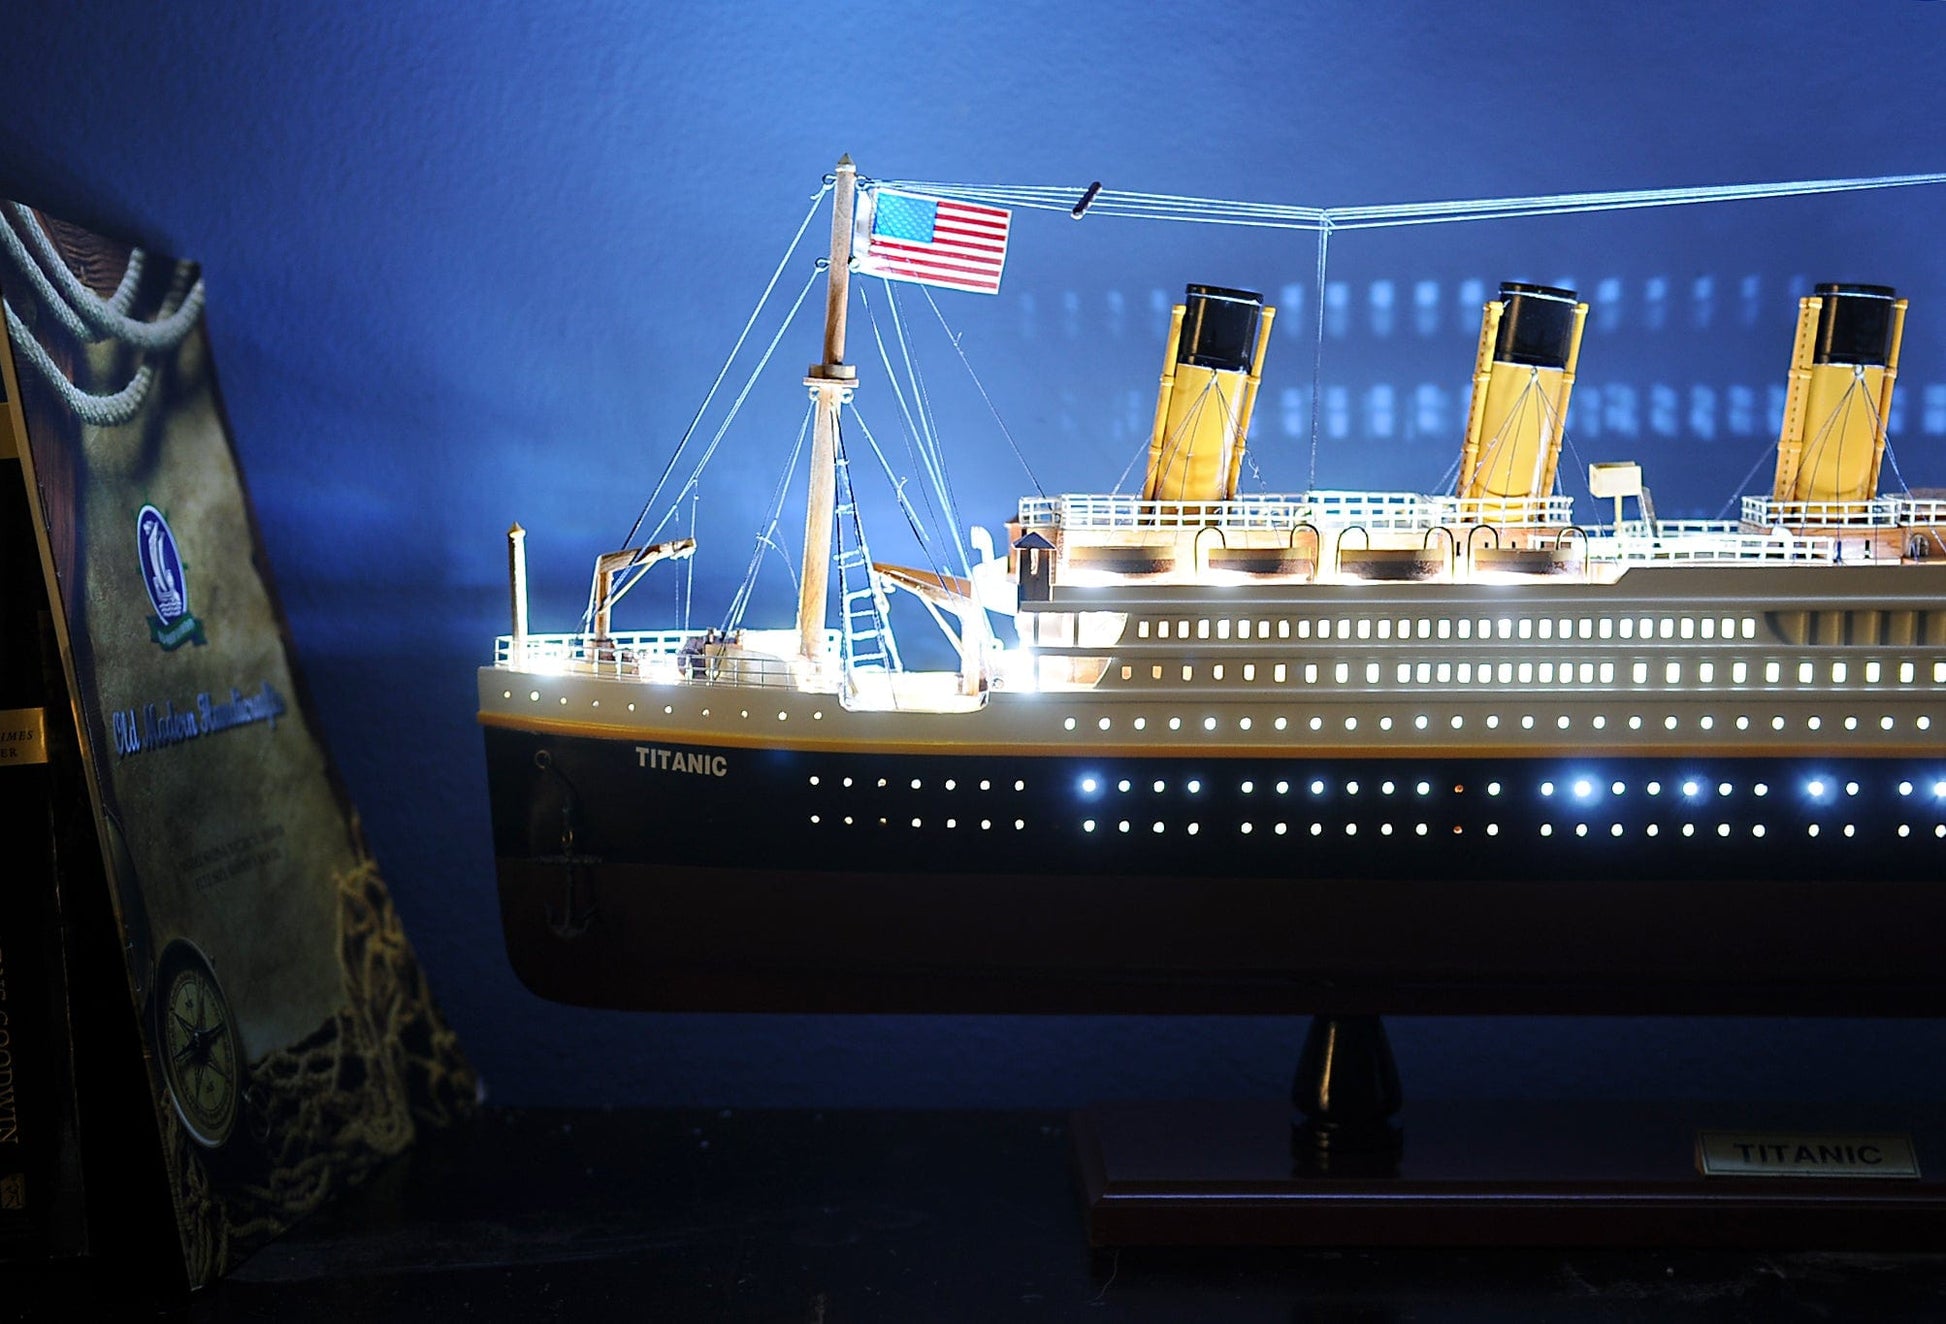 ALDO Hobbies & Creative Arts> Collectibles> Scale Model L: 32 W: 4 H: 13 Inches / NEW / Wood RMS Titanic Painted  Medium With lights Passenger Ship Ocean Liner Wood Model Assembled